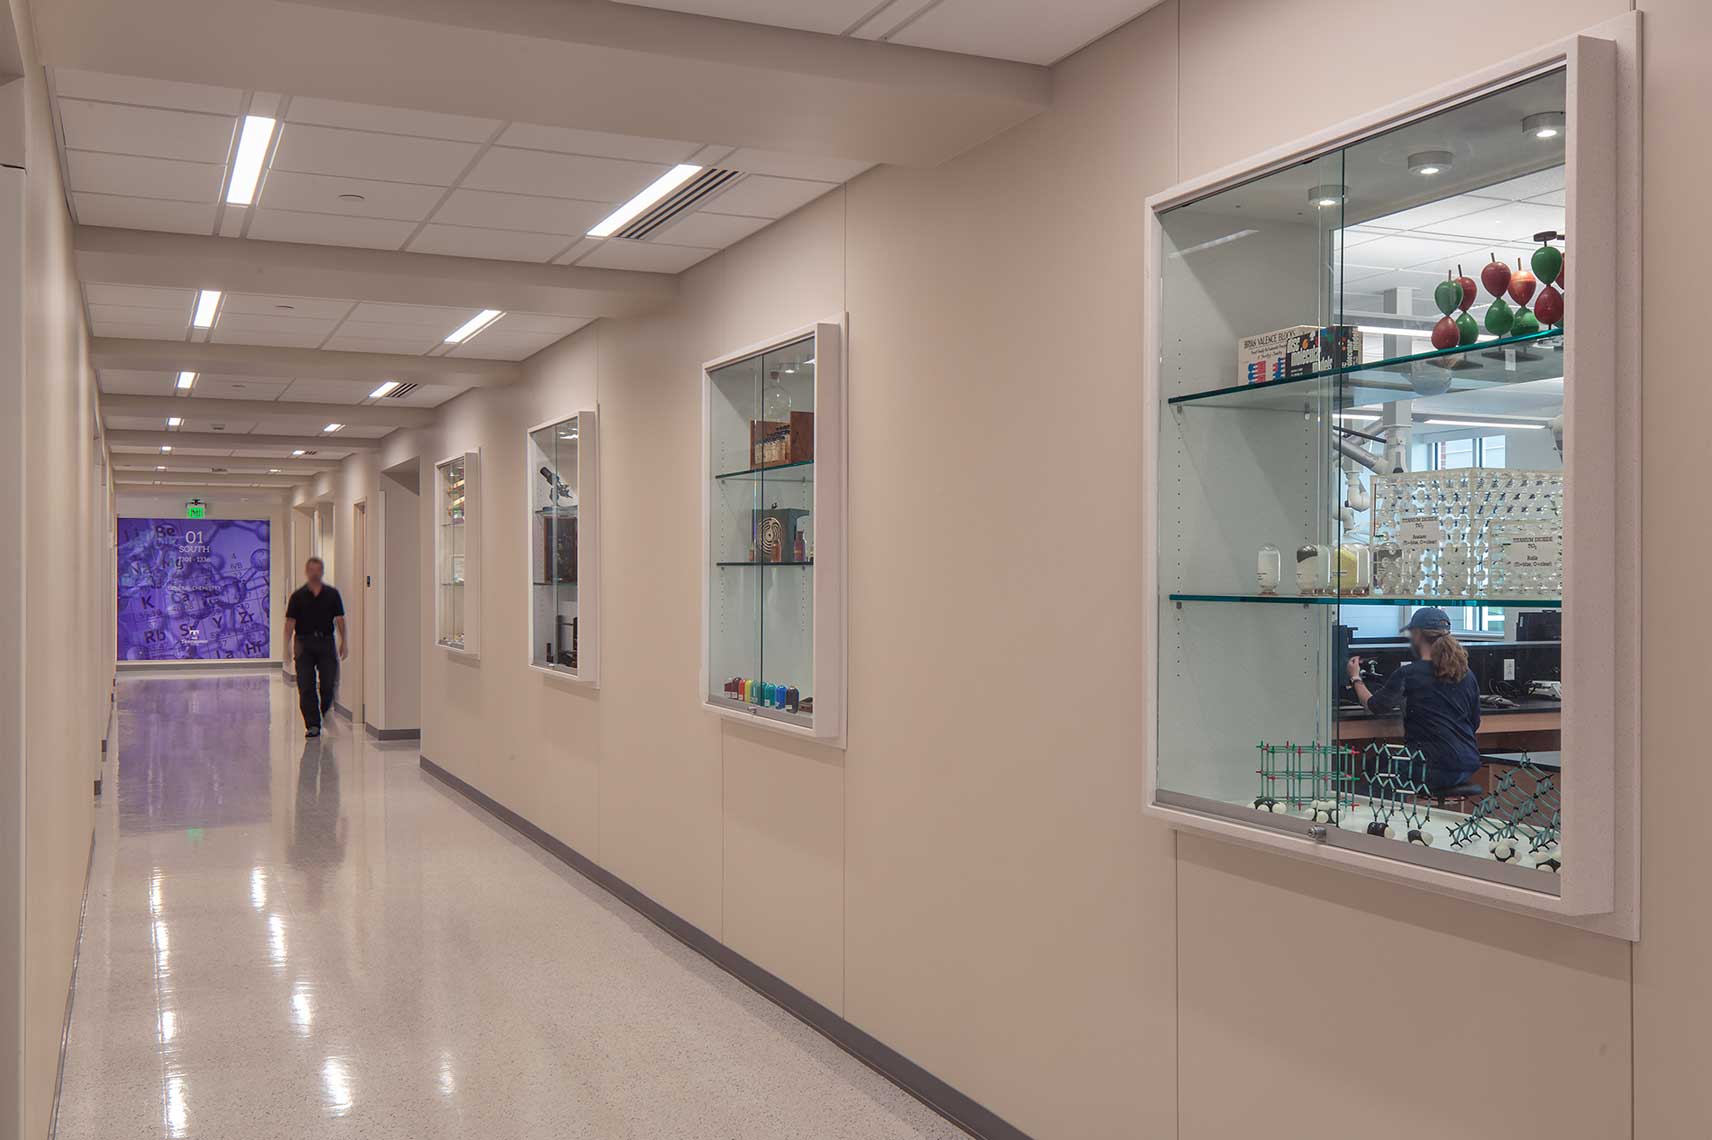 The corridor at TN Tech allows passers-by to view work going on within the labs.